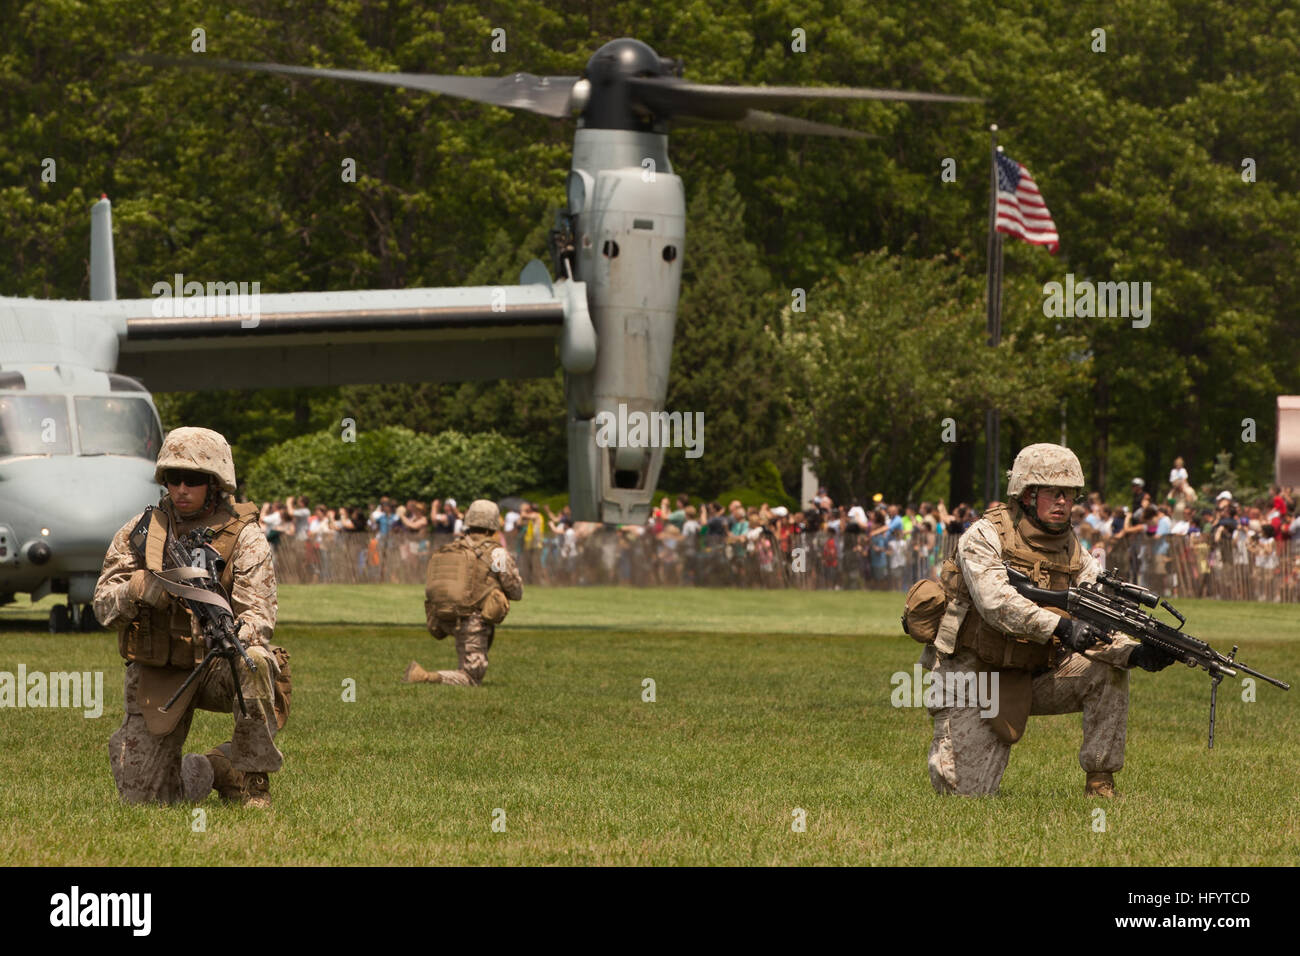 110528-M-KZ372-032 EAST MEADOW, N.Y. (May 28, 2011) Marines from the 24th Marine Expeditionary Unit (24th MEU) perform a helicopter raid at Eisenhower Park as part of Fleet Week New York 2011. Fleet Week has been New York City's celebration of the sea services since 1984 and is an opportunity for citizens of New York and the surrounding tri-state area to meet Sailors, Marines, and Coast Guardsmen, as well as see first-hand, the capabilities of today's maritime services. (U.S. Marine Corps photo by Sgt. Randall A. Clinton/Released) US Navy 110528-M-KZ372-032 Marines from the 24th Marine Expedit Stock Photo